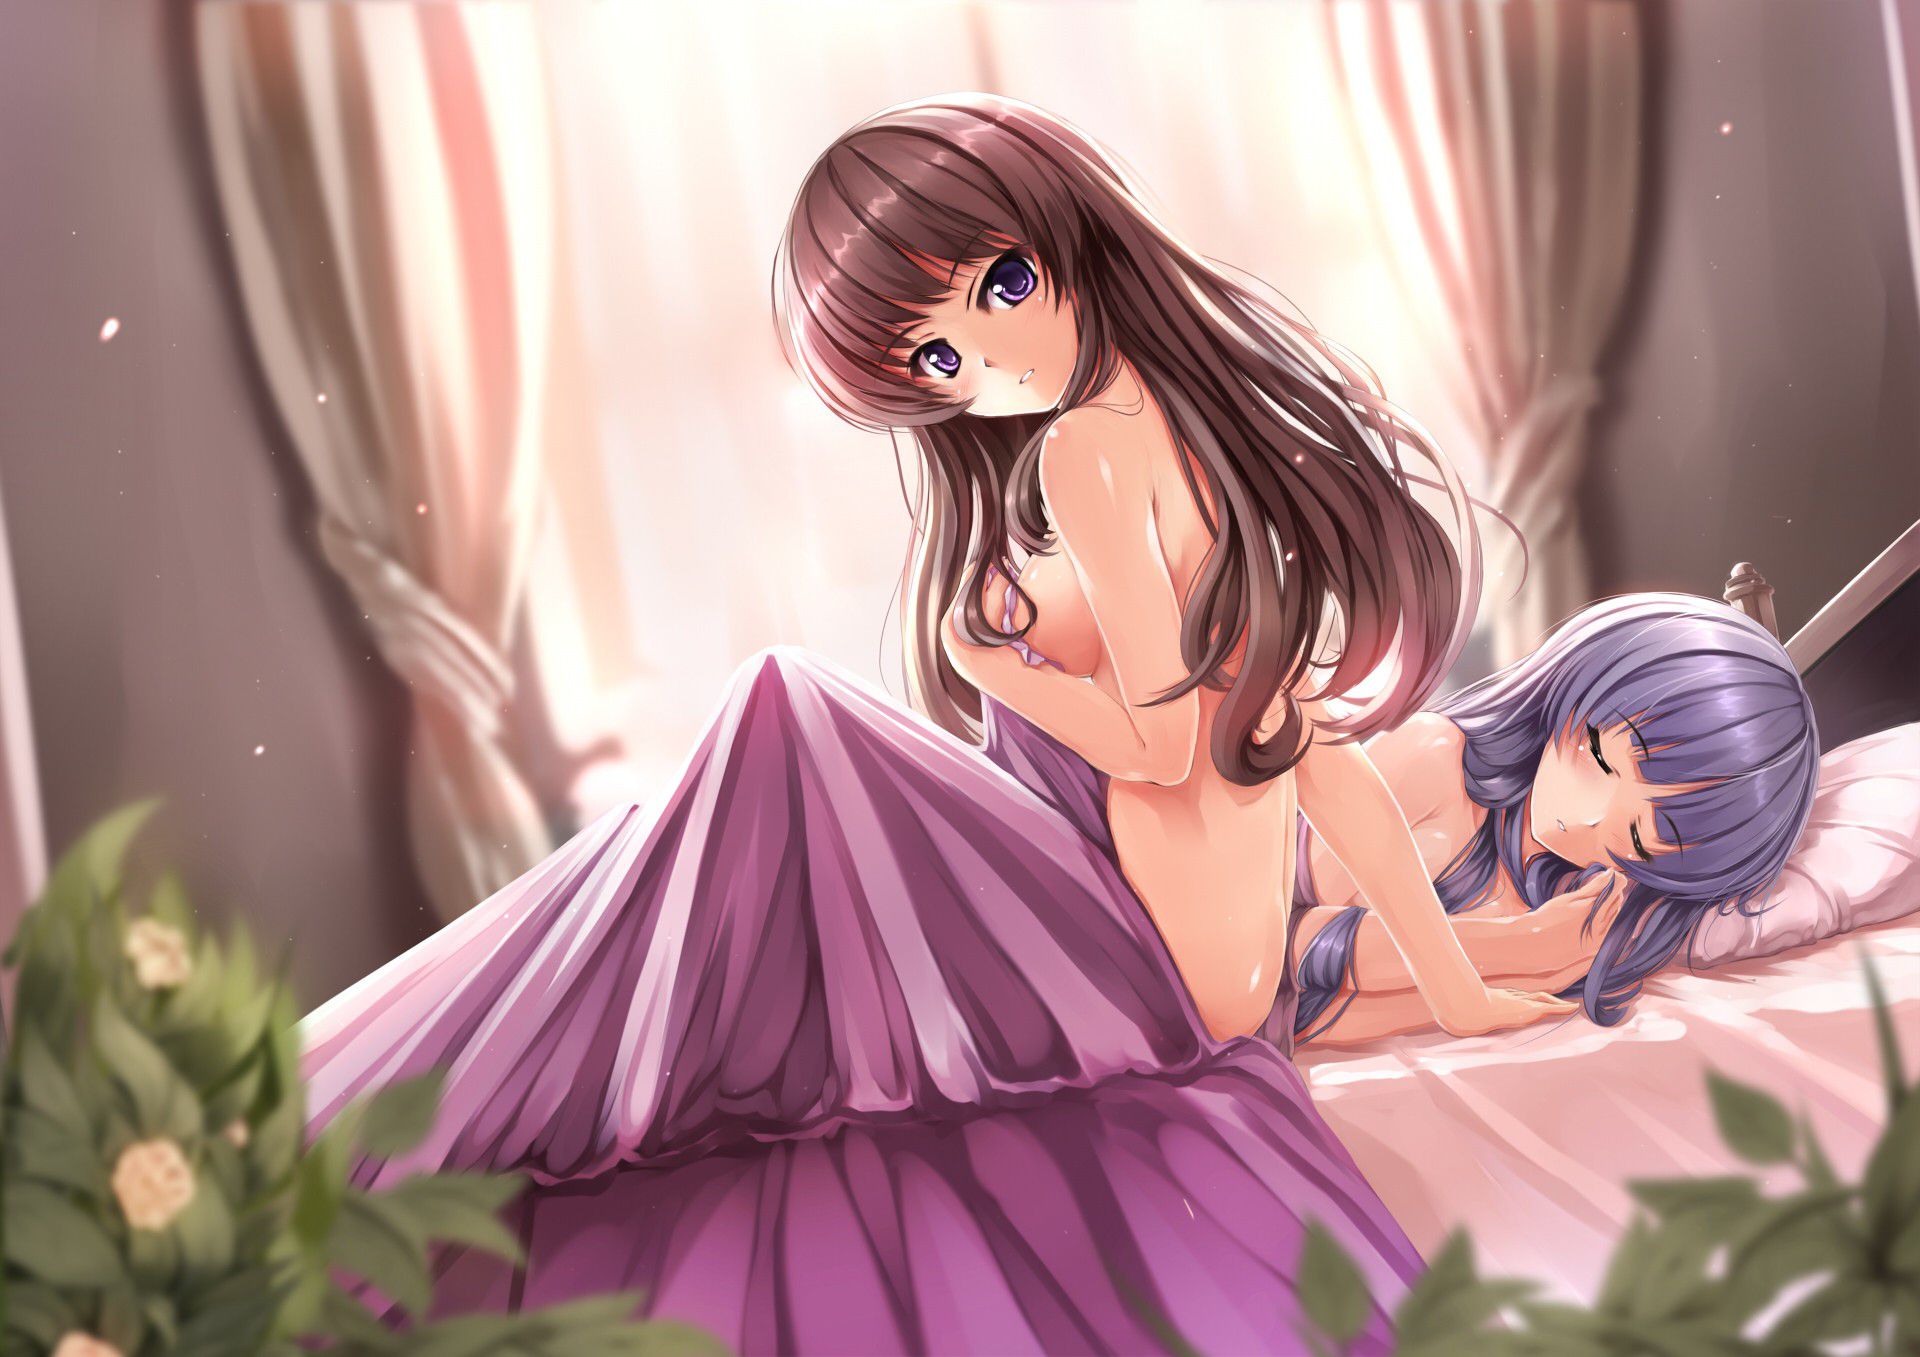 [Yuri/lesbian] secondary erotic image wwww flirting in the girls with each other 3 36